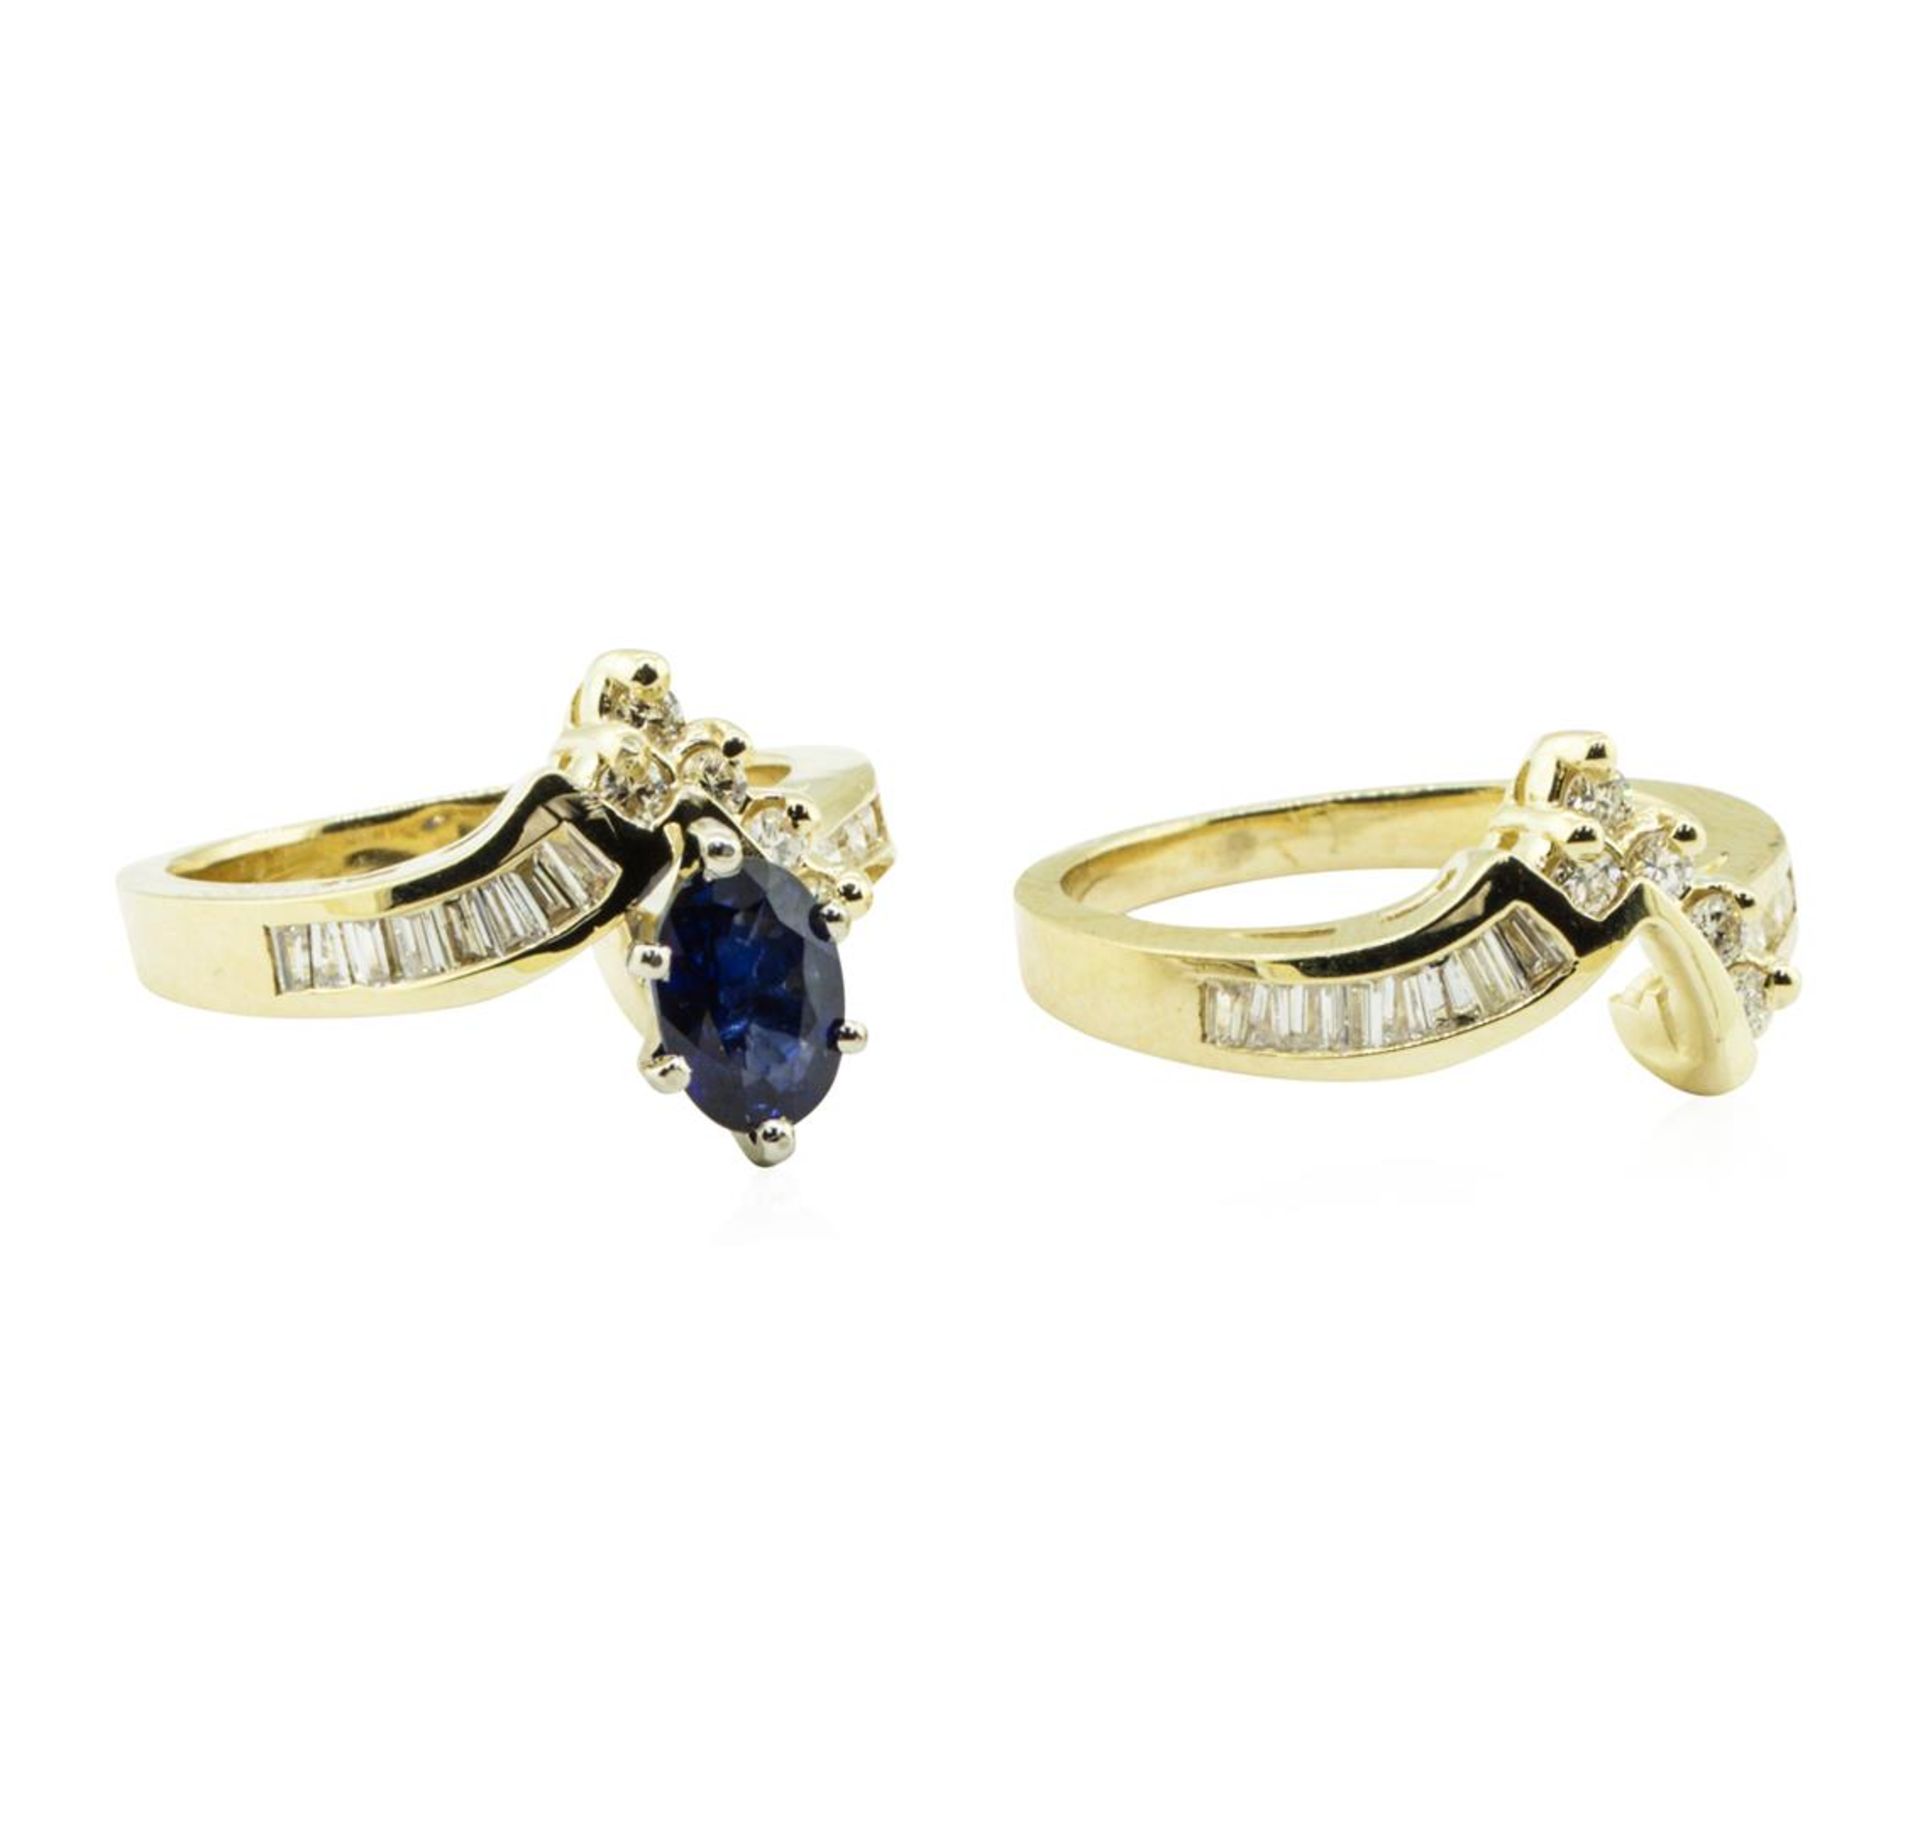 1.53 ctw Oval Brilliant Blue Sapphire And Diamond Ring & Wedding Band - 14KT Yel - Image 3 of 5